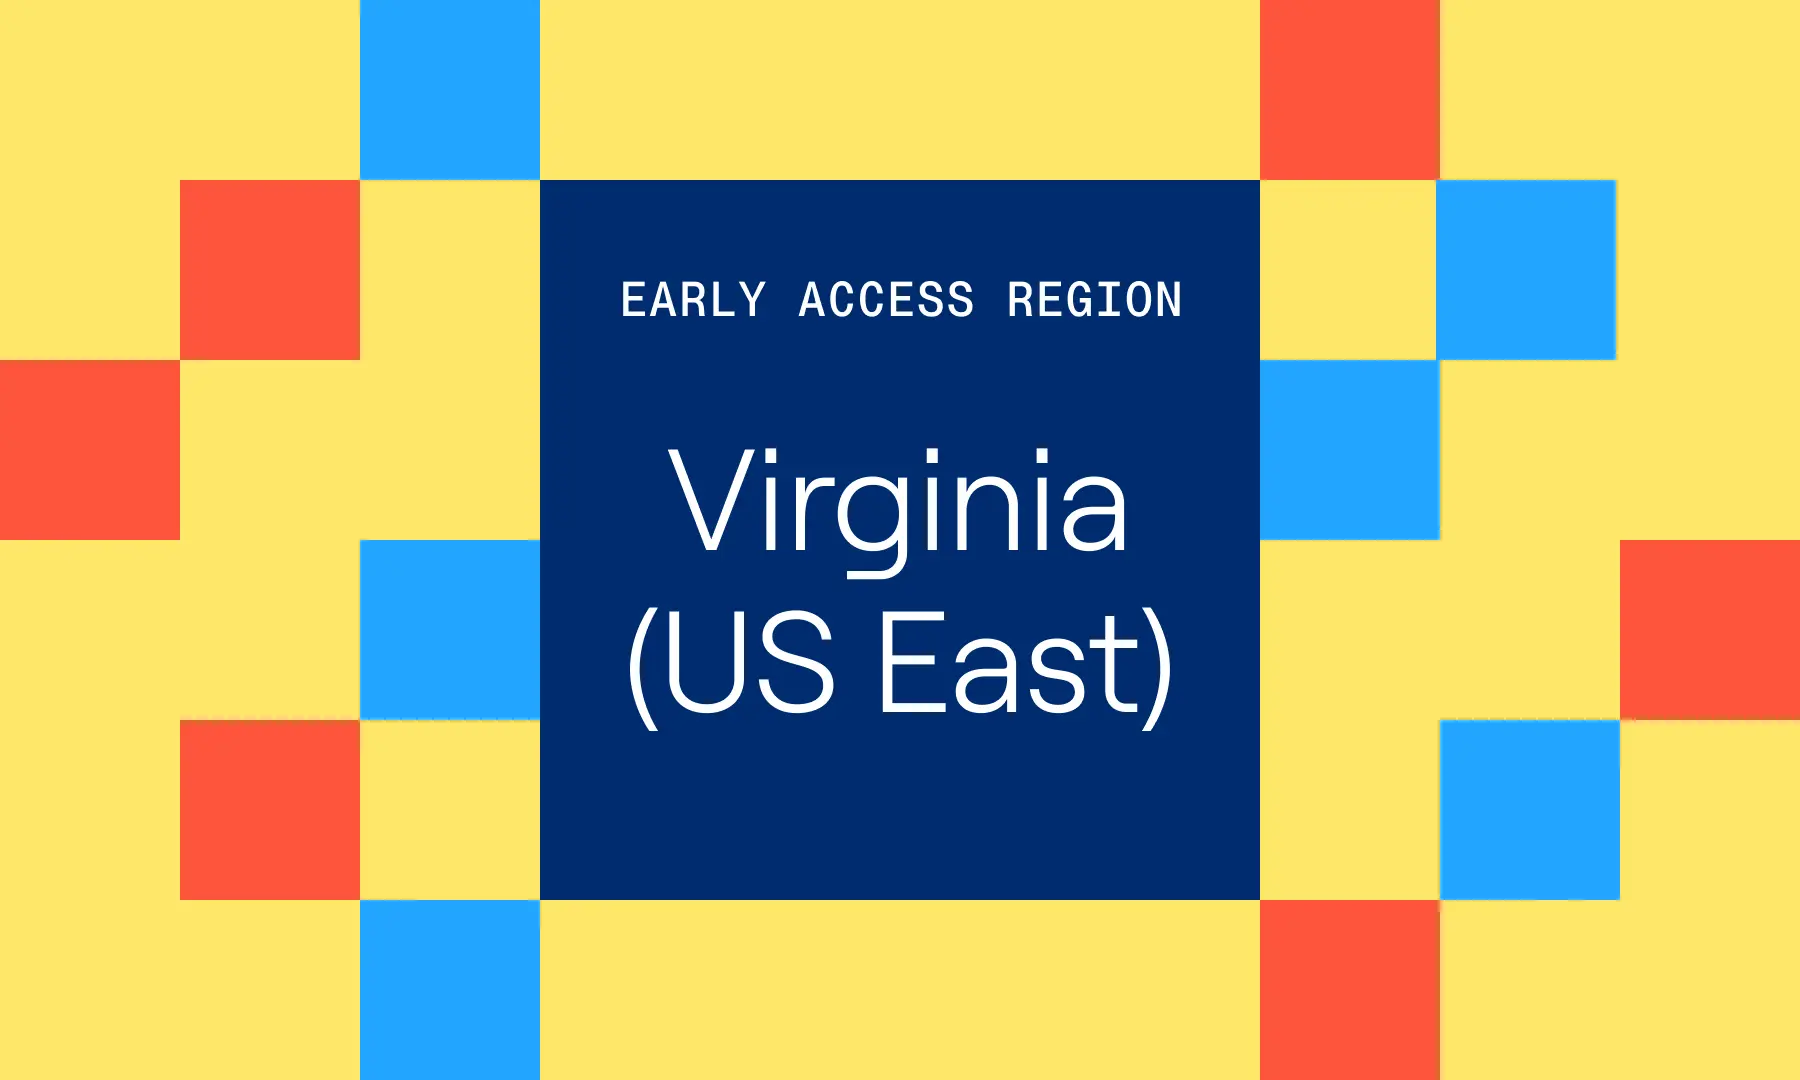 New Region in Early Access: Virginia (US East)